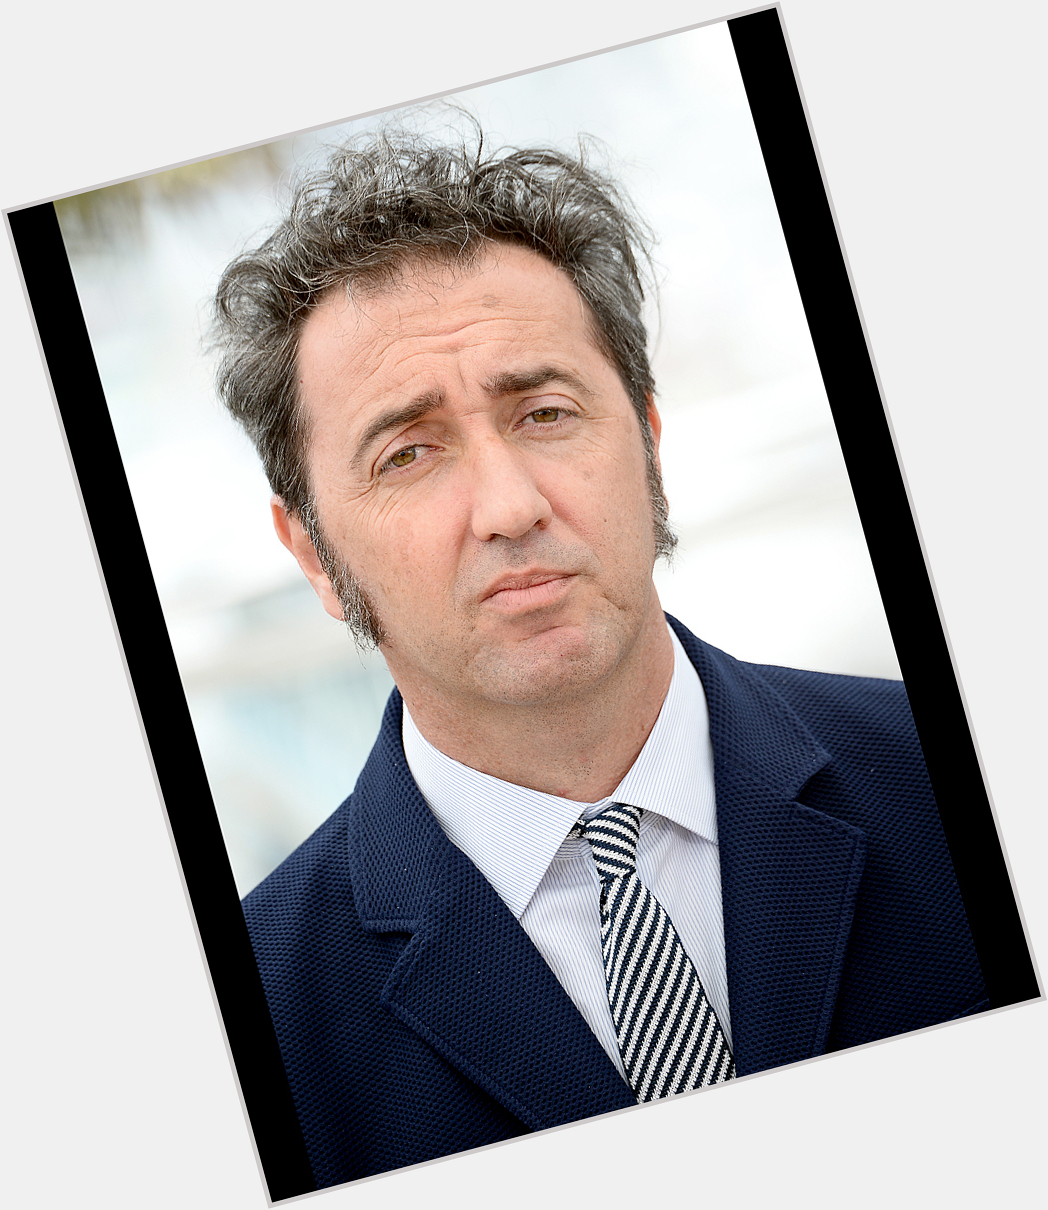 Paolo Sorrentino hairstyle 3.jpg